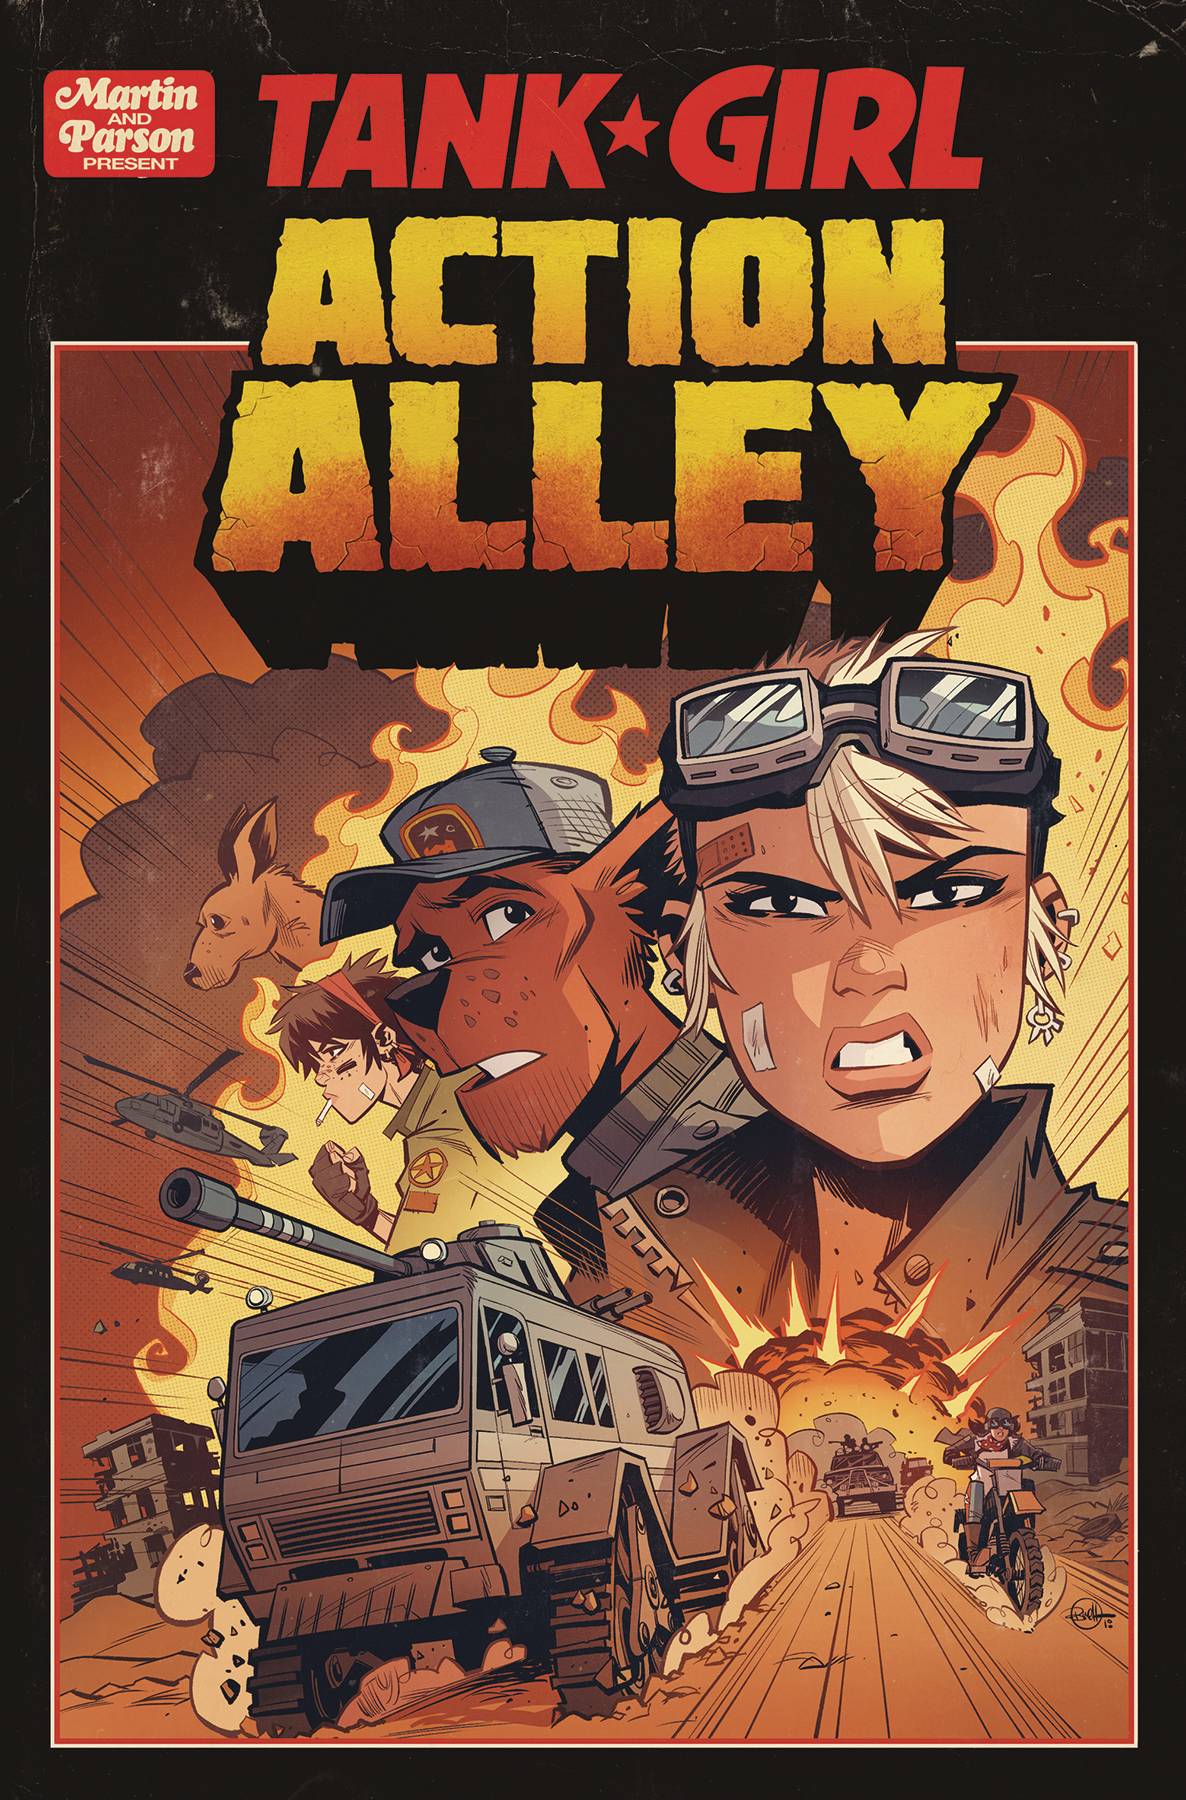 Tank Girl Action Alley #1 Cover A Parson